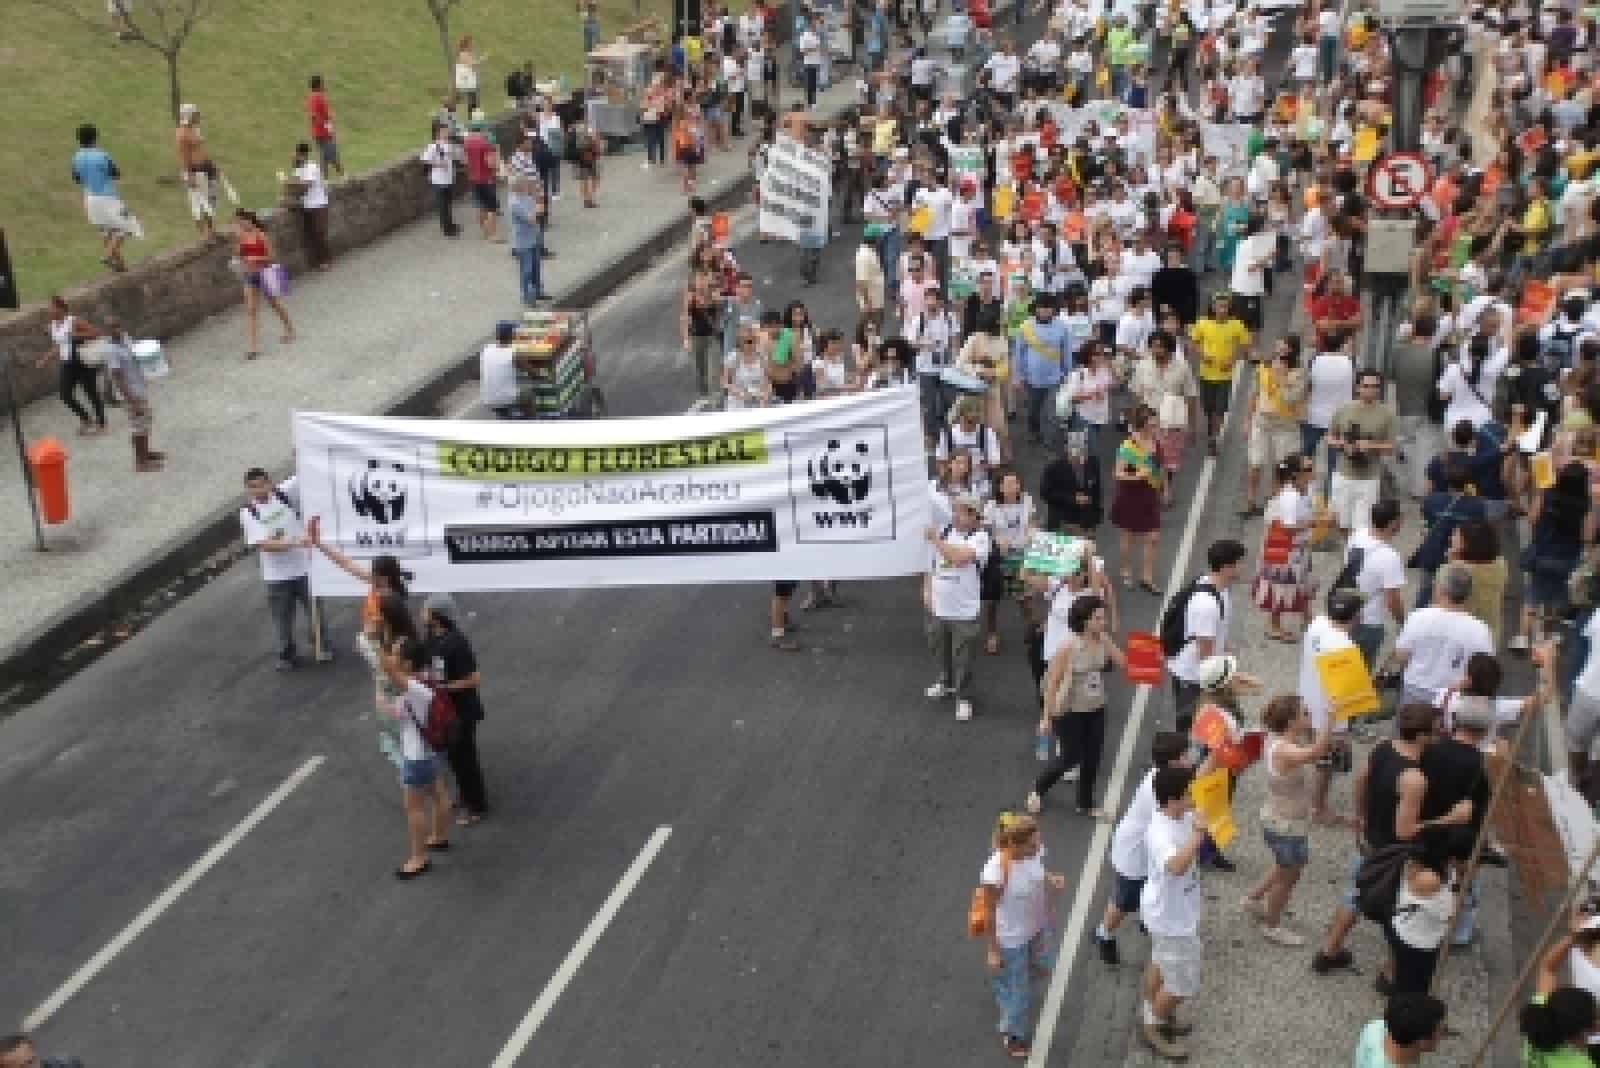 March for appealing to Dilma Rousseff, © by  WWF/Marco Sarti